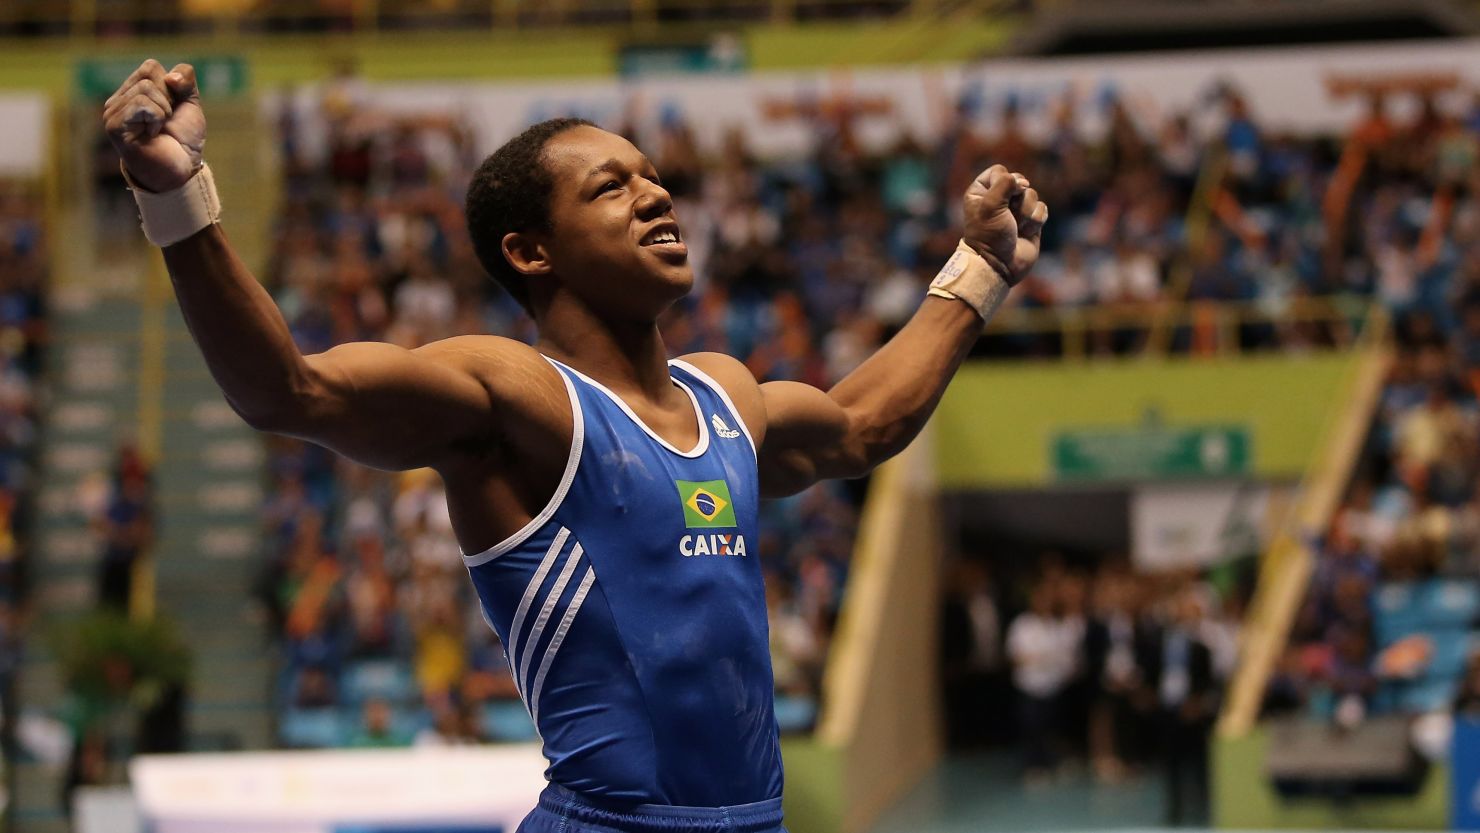 Angelo Assumpcao of Brazil celebrates during day one of the Gymnastics World Challenge Cup Brazil 2015 at Ibirapuera Gymnasium on May 2, 2015.